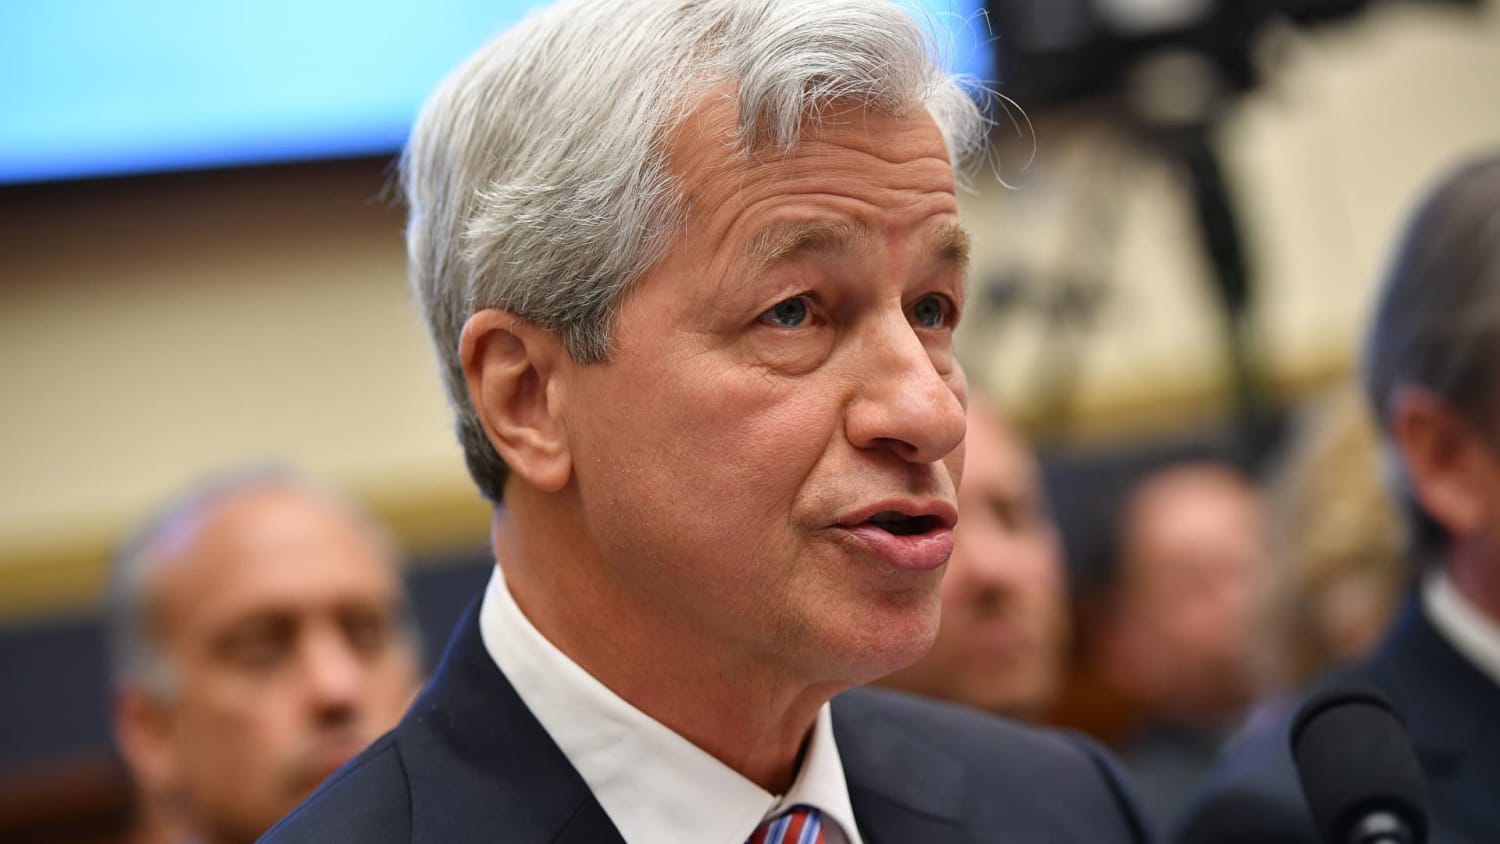 JPMorgan shares surge 8% after CEO says bank is "very valuable" at current prices